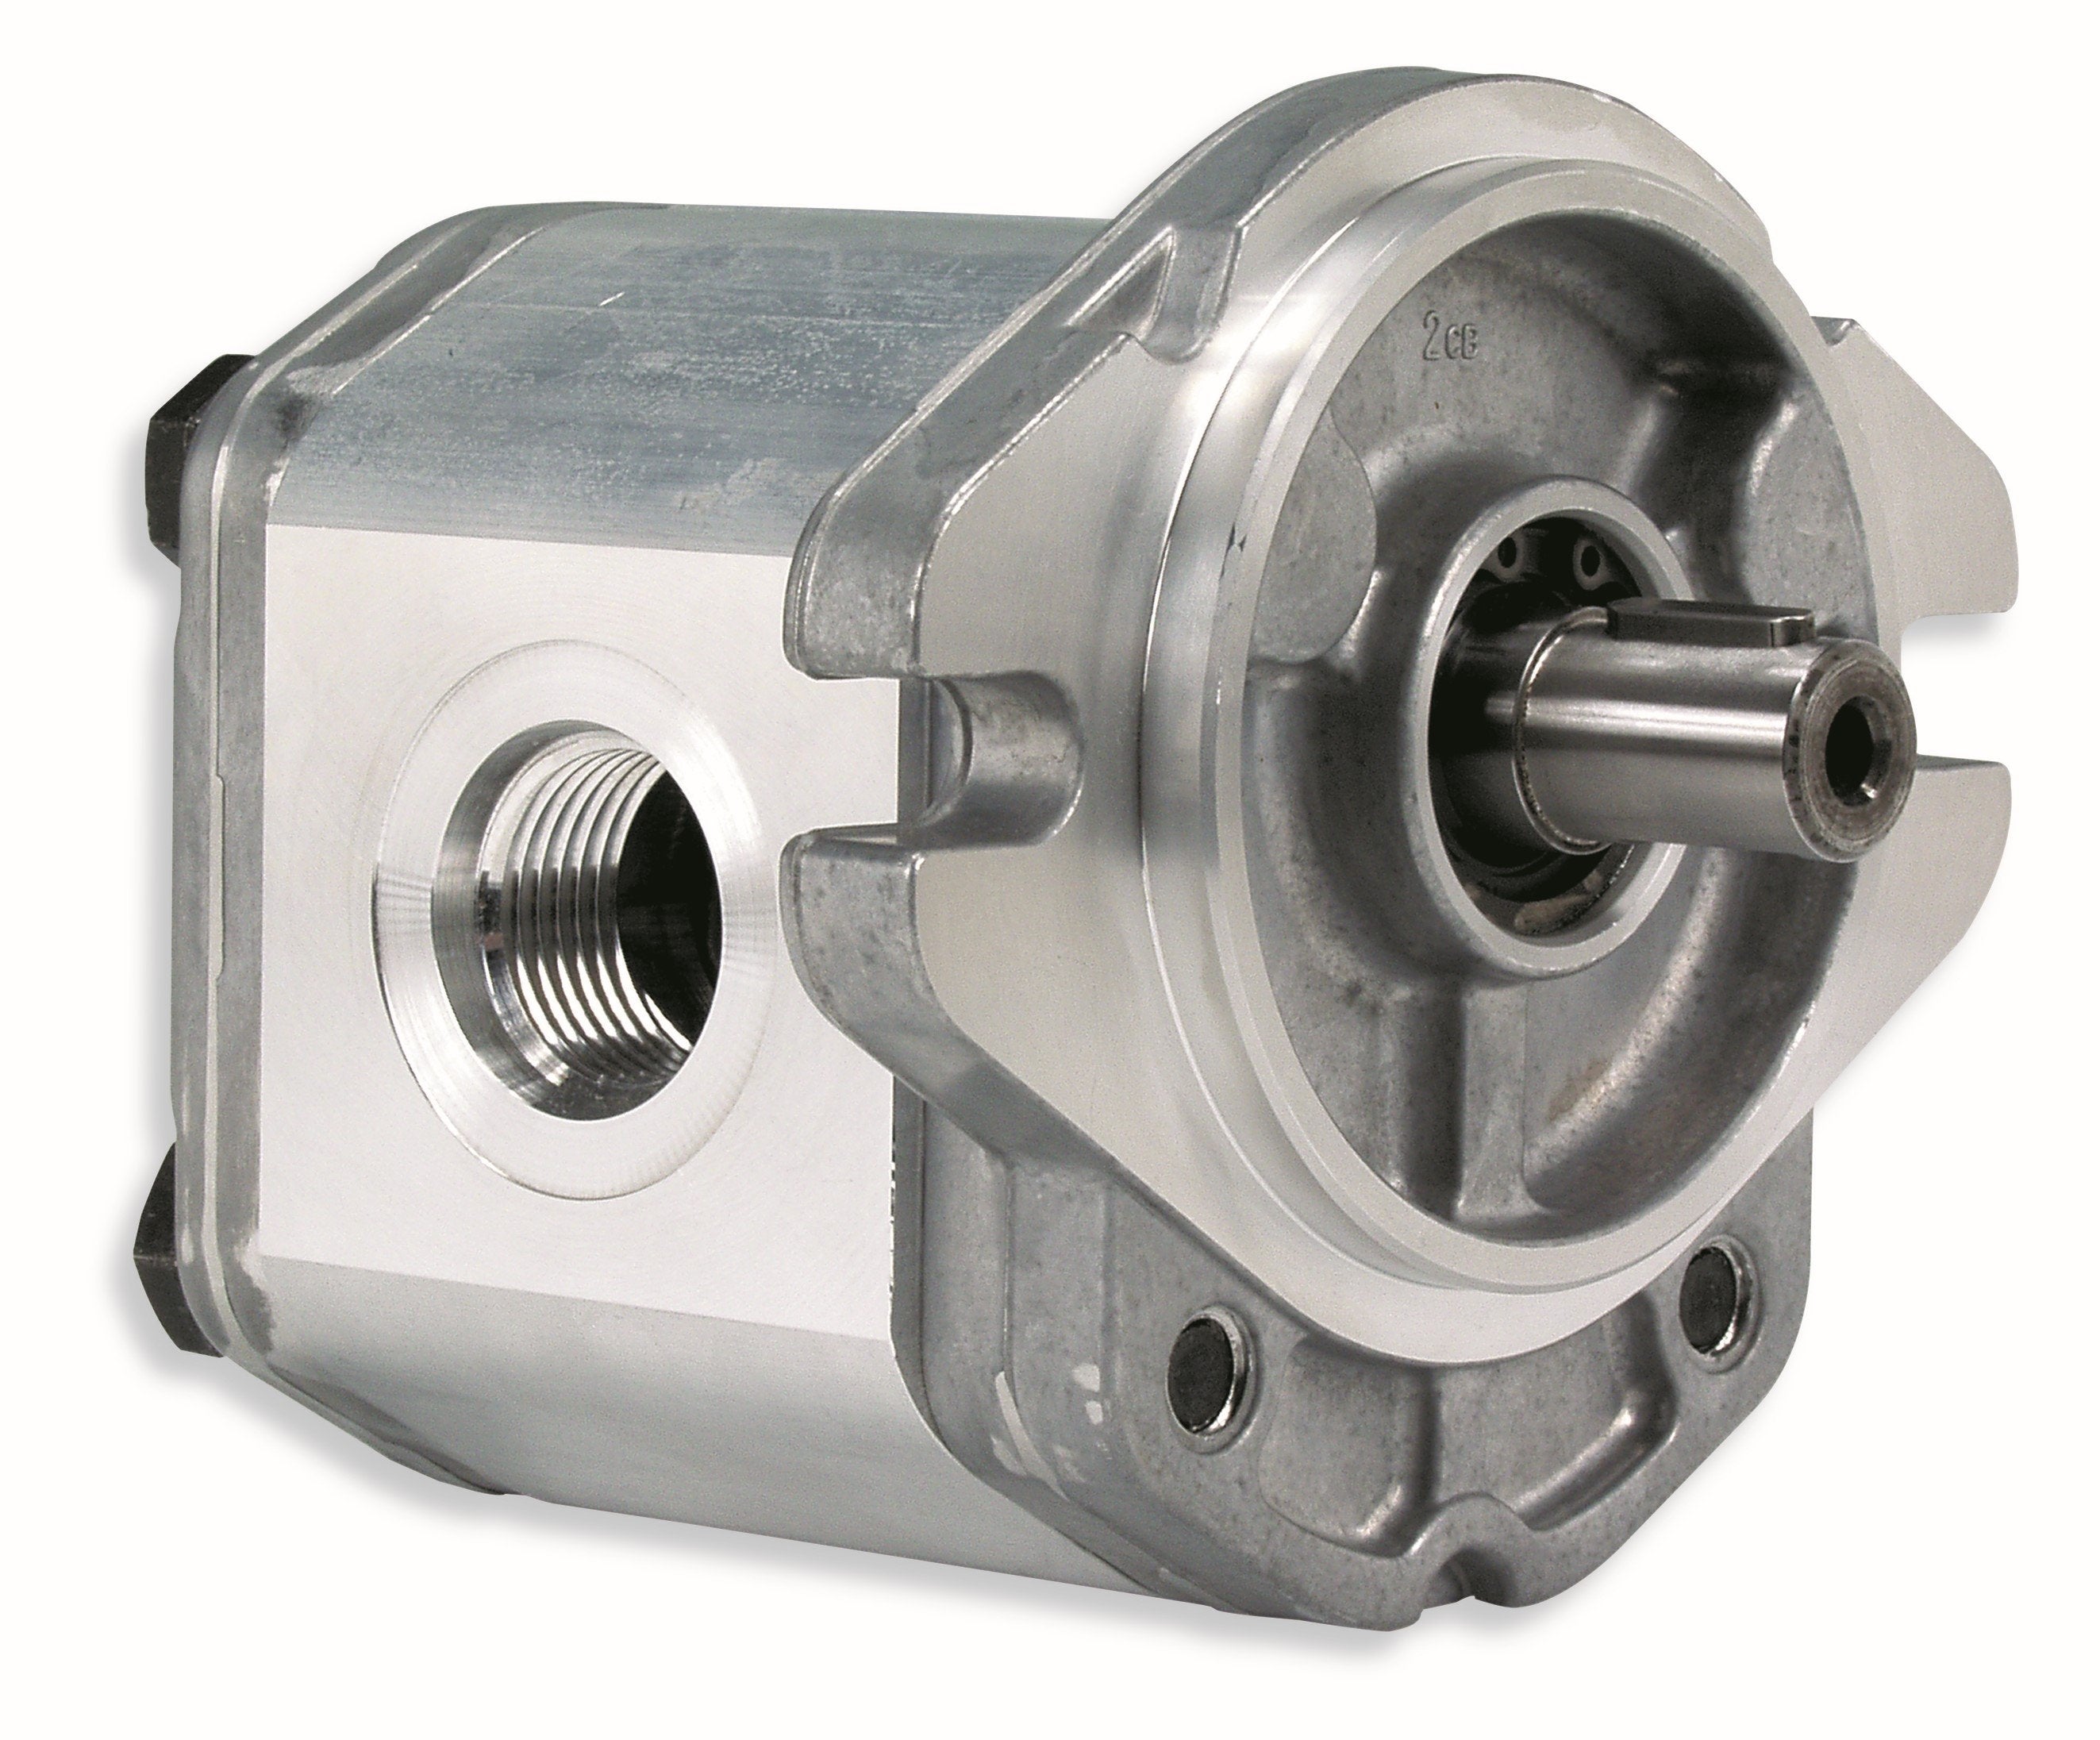 GHM1A-R-4-E2 : Marzocchi Gear Motor, Bidirectional, 2.8cc, 3915psi rated, 5000RPM, 0.5 (1/2") #8 SAE ports, 1/2" Bore x 1/8" Keyed Shaft